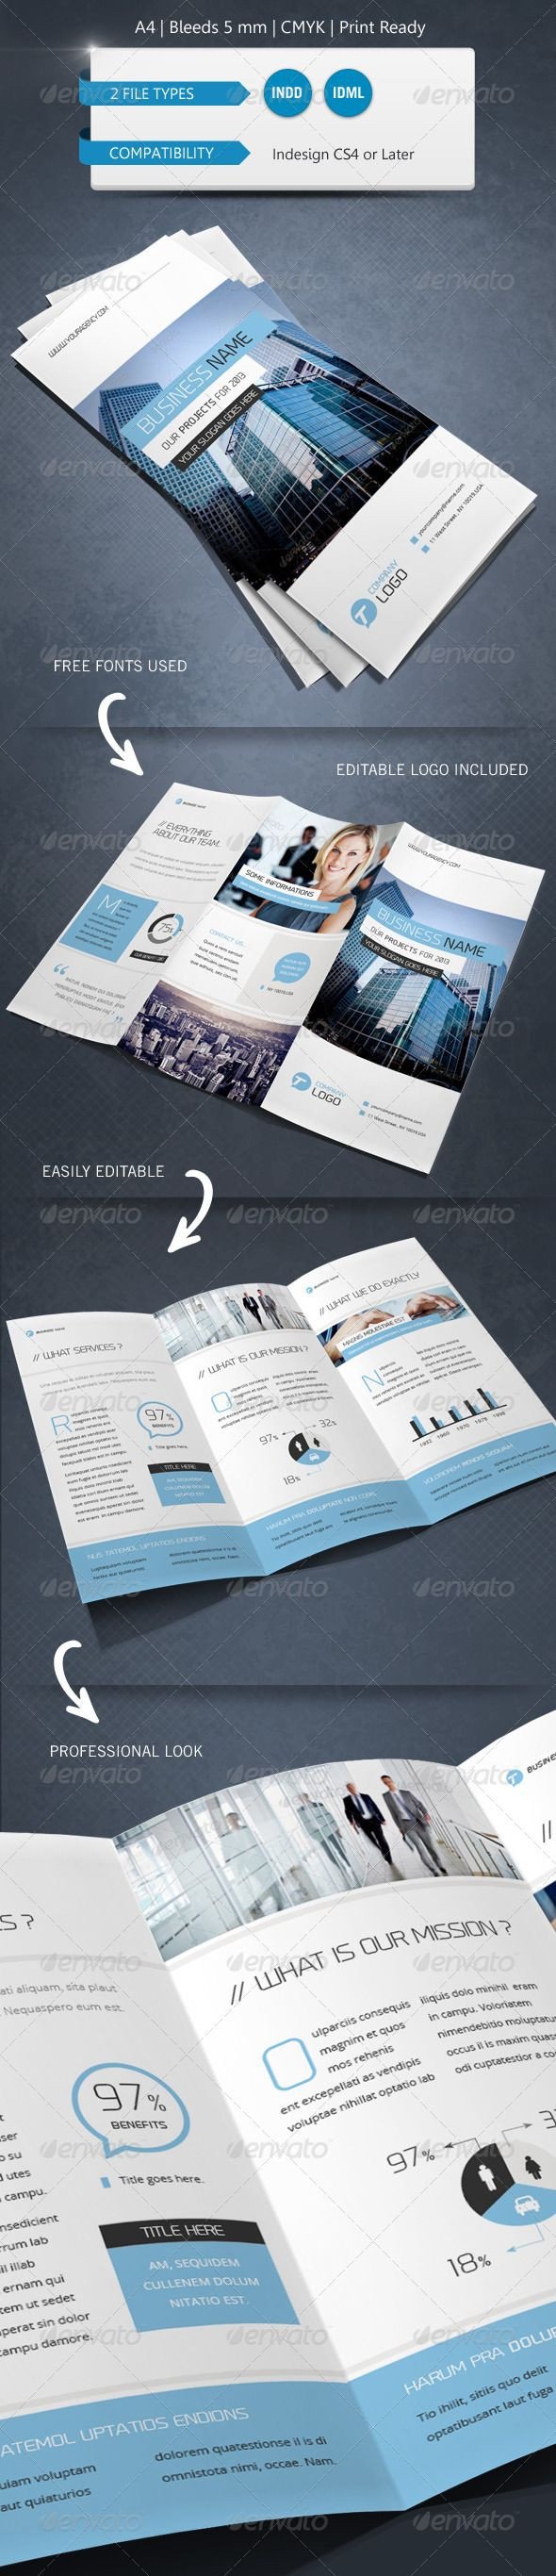 Corporate Indesign Trifold Brochure Template